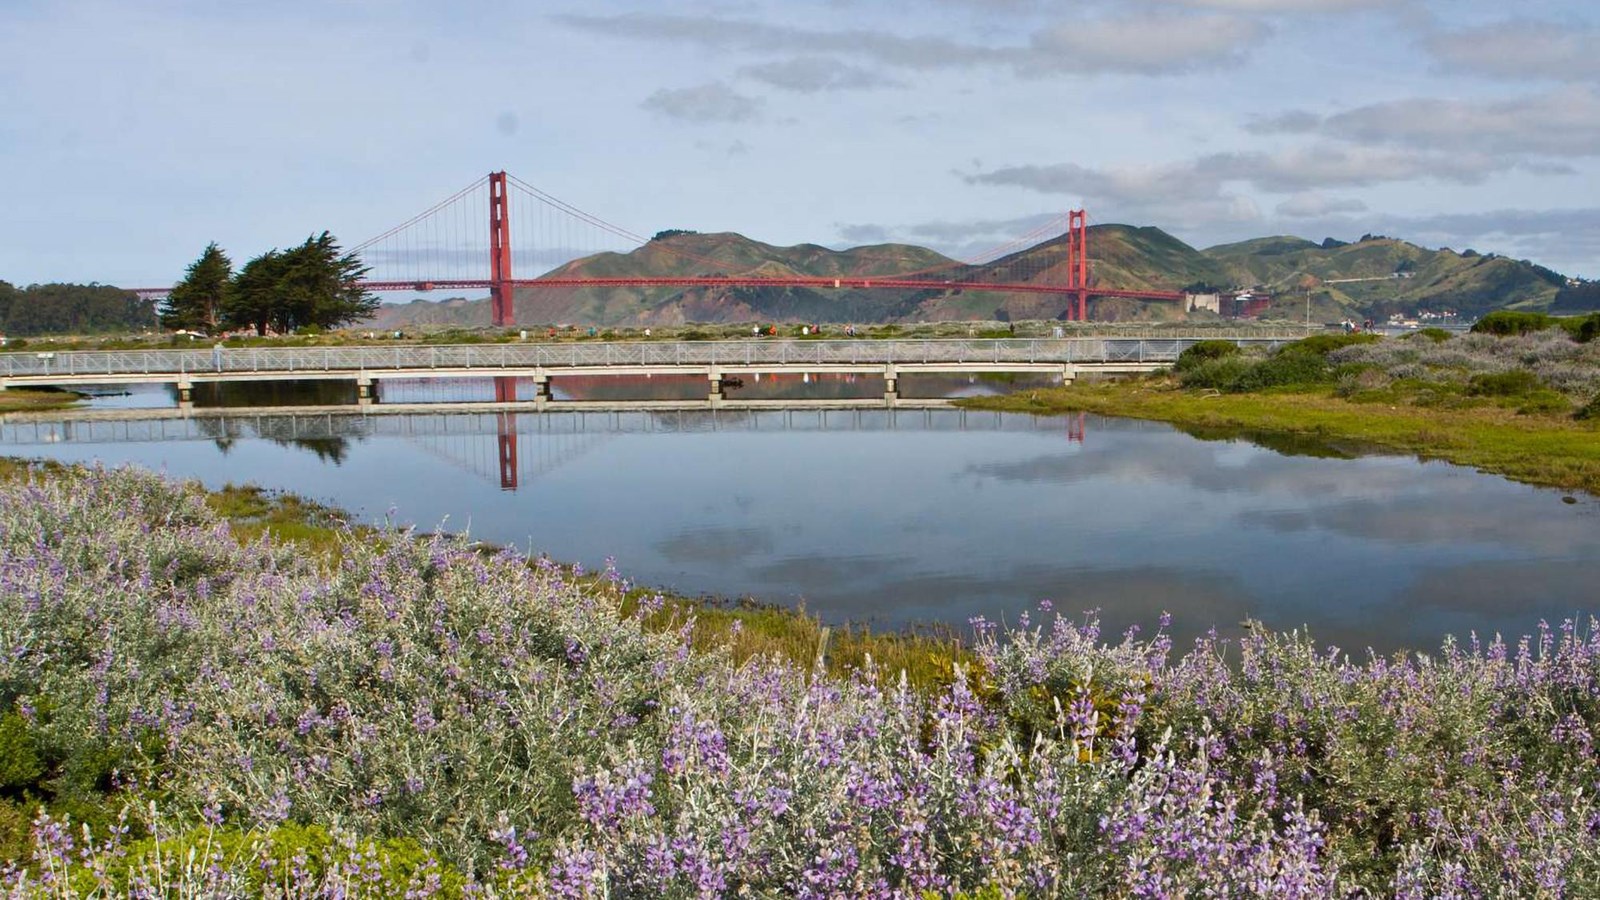 View of the Crissy Marsh with the Golden Gate Bridge in the distance.